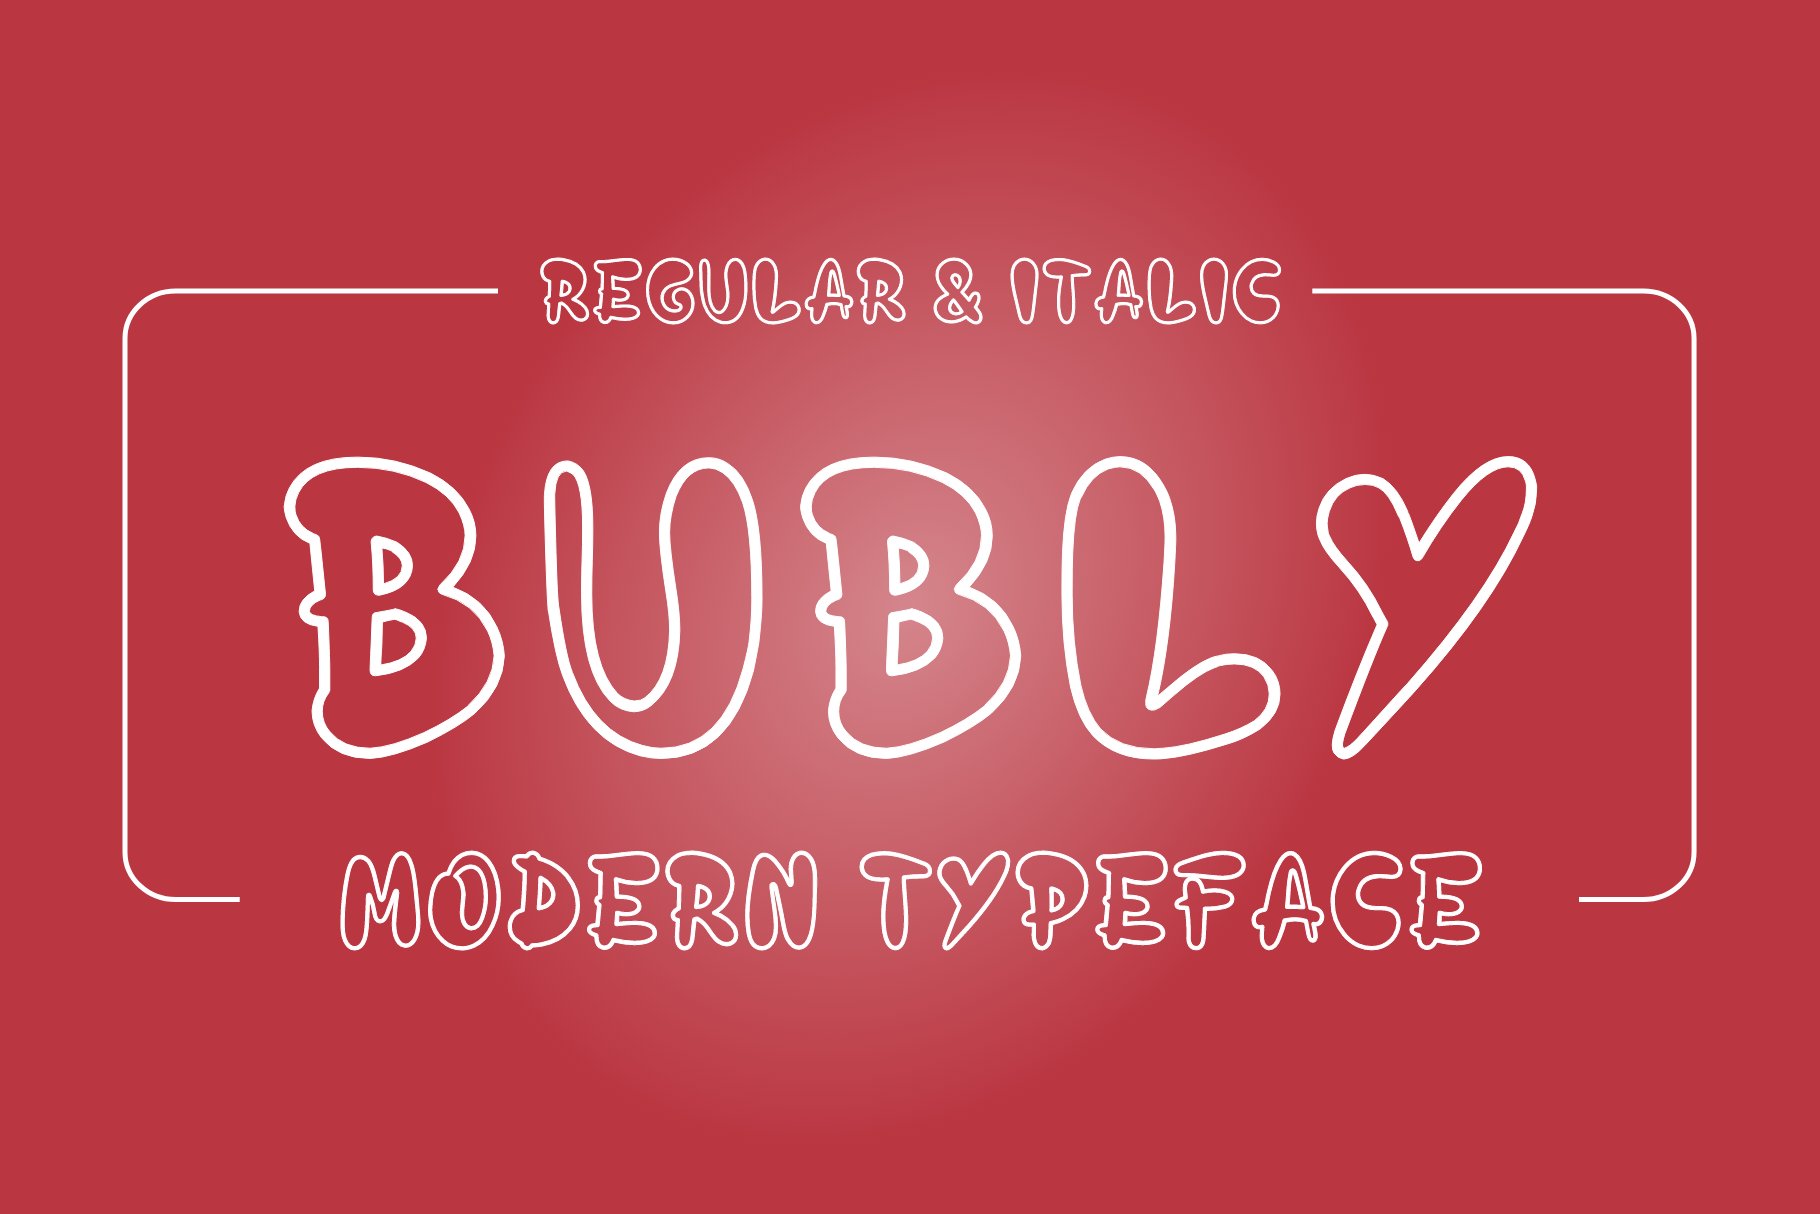 Bubly-Outline Modern Typeface cover image.